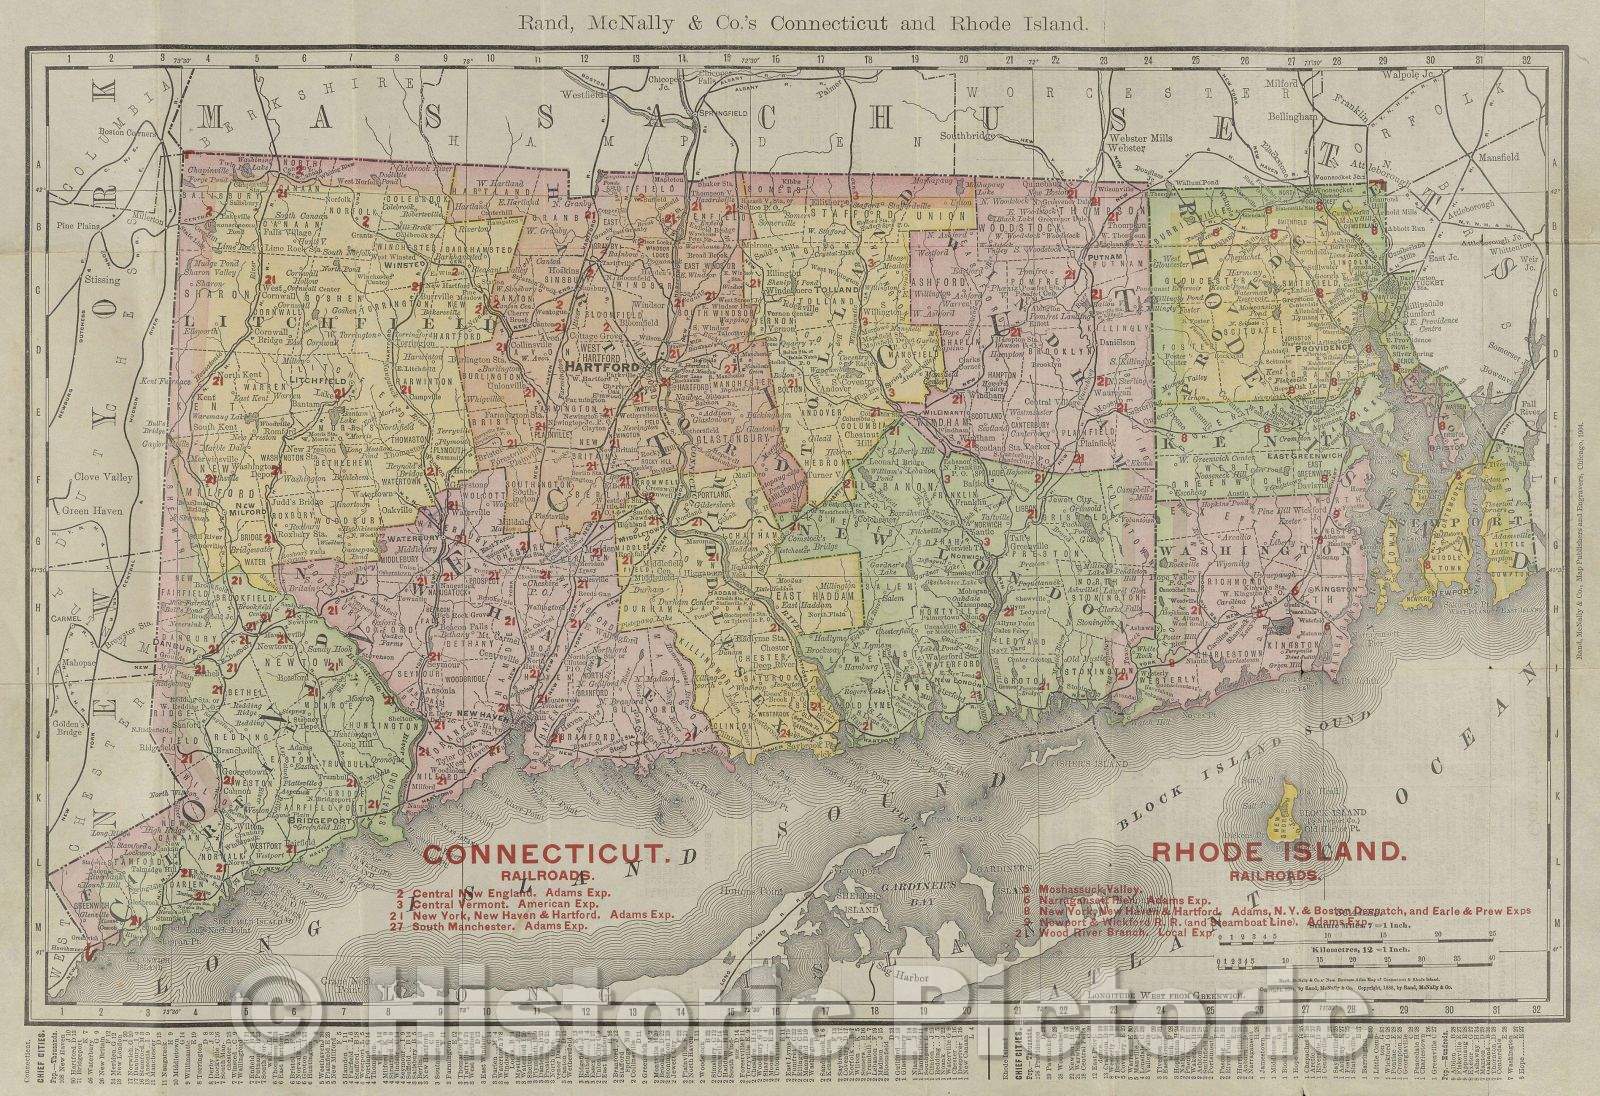 Historic Map : Rand, McNally and Co.'s Connecticut and Rhode Island, c. 1896 , Vintage Wall Art